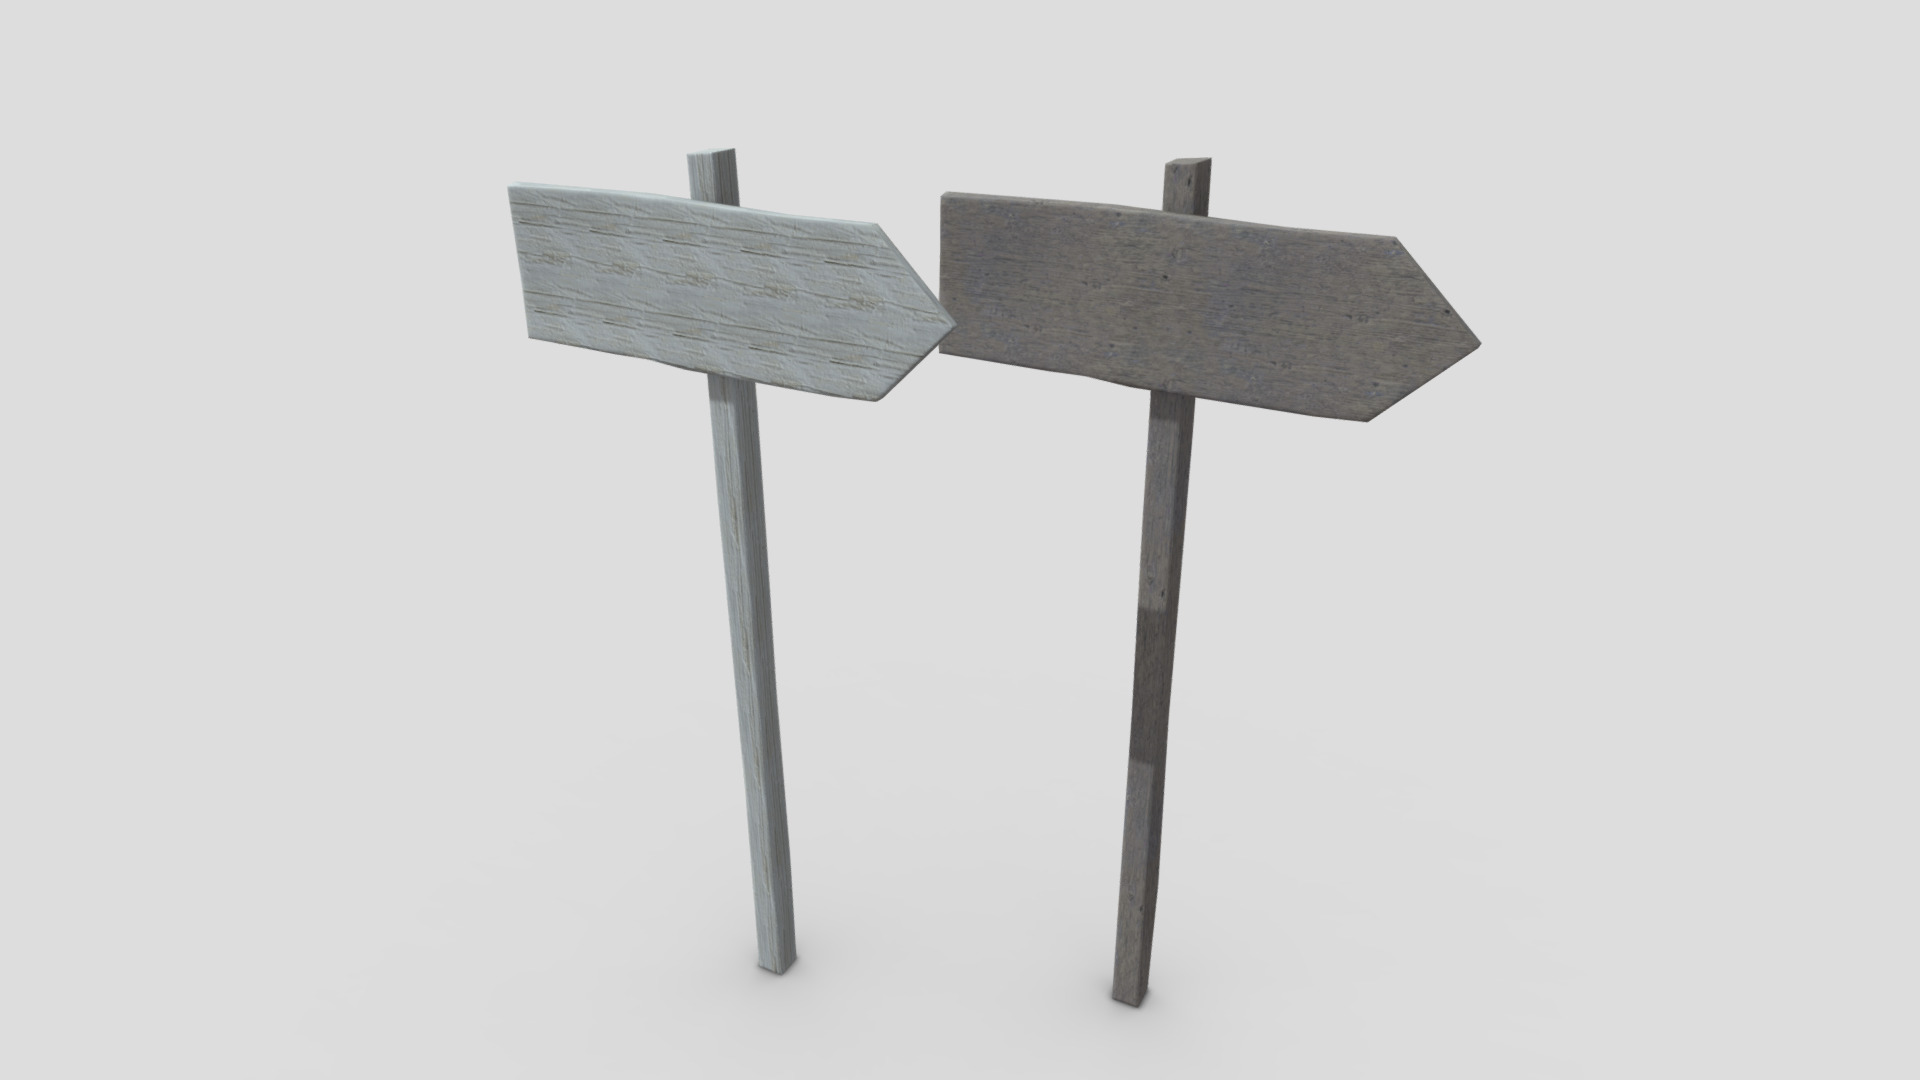 3D model Wooden Sign 1 - This is a 3D model of the Wooden Sign 1. The 3D model is about a wooden sign post.